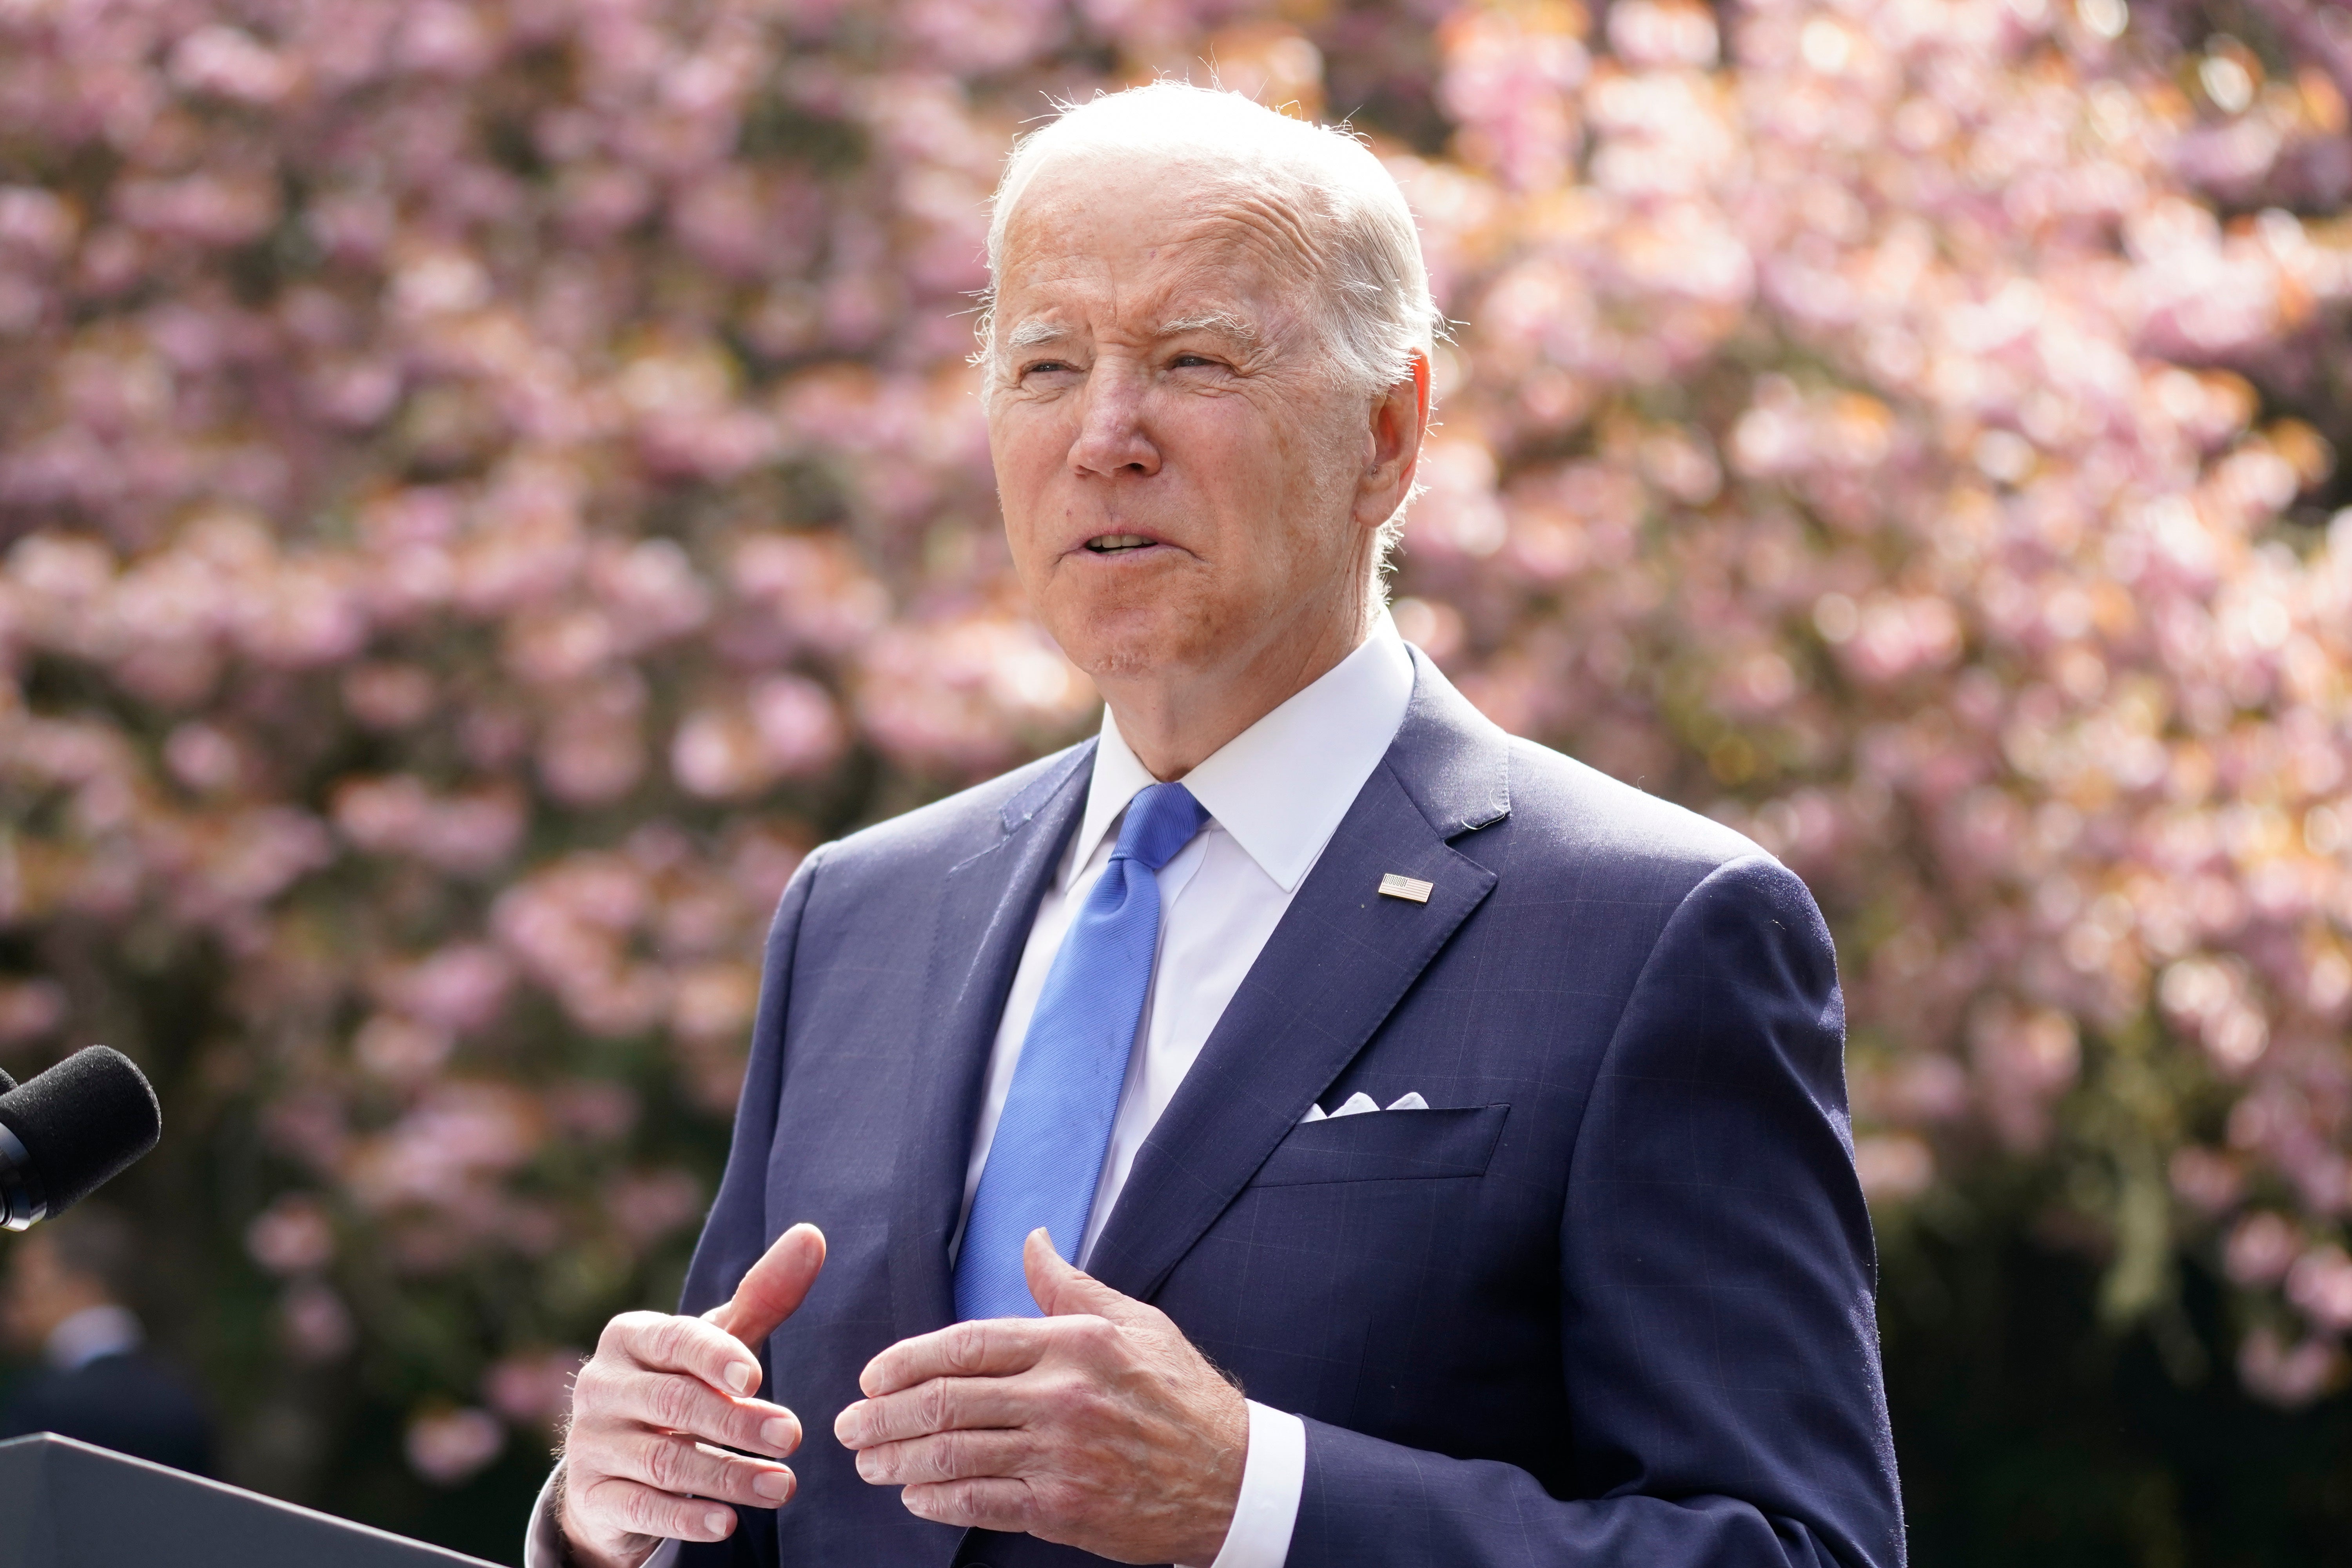 Joe Biden has another problem to cope with ahead of the midterm elections in November